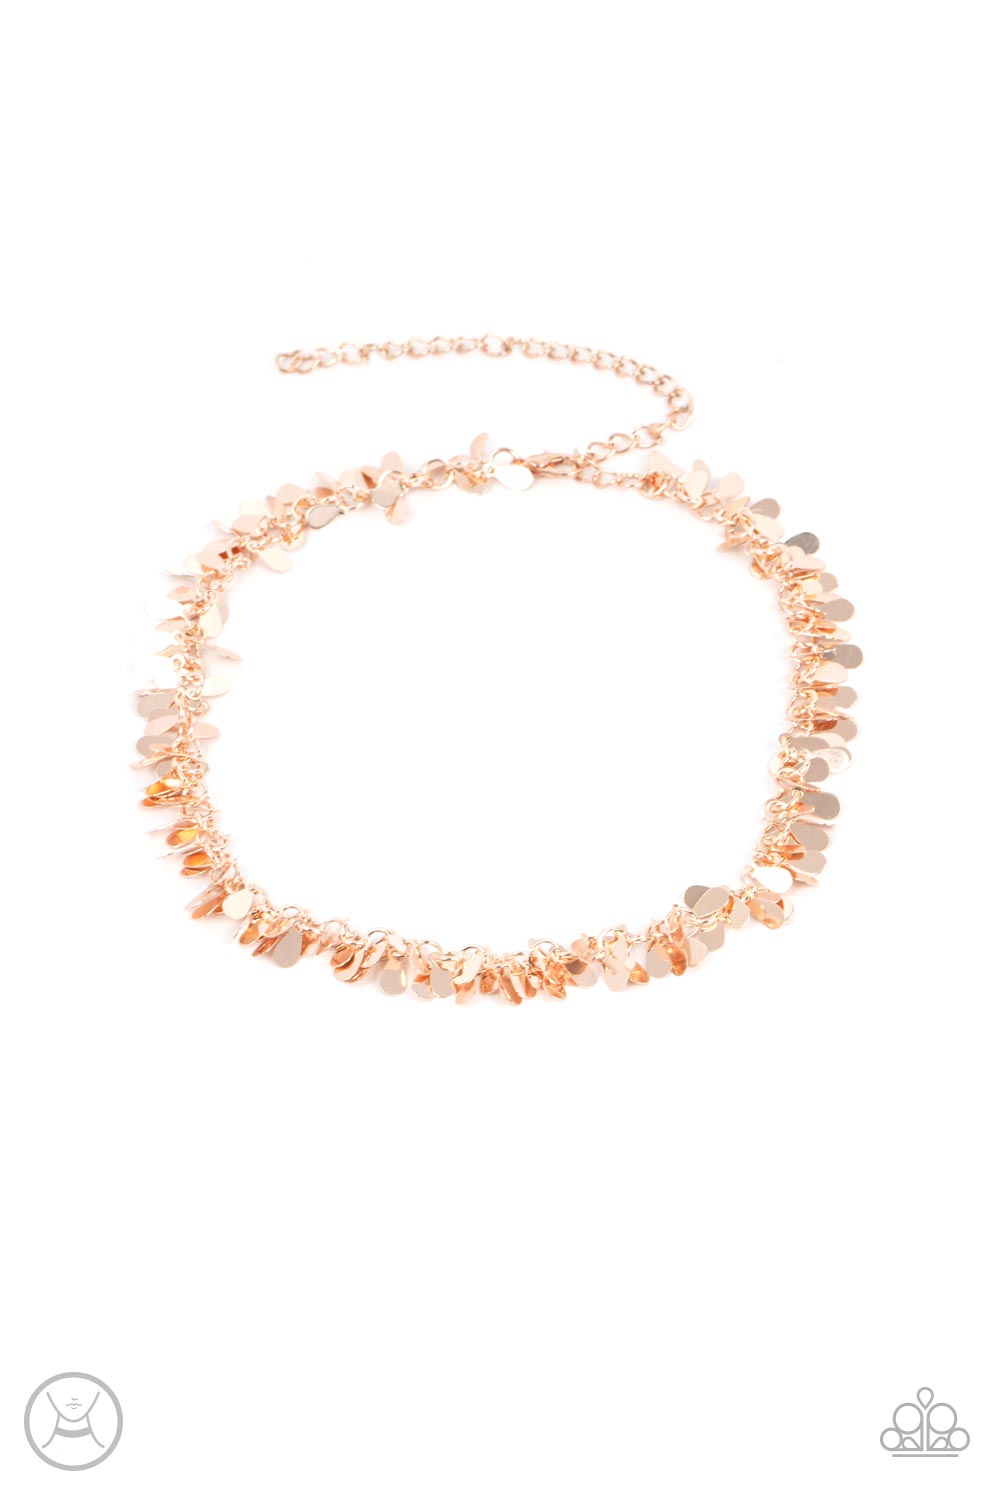 Surreal Shimmer Gold Choker Necklace - Paparazzi Accessories  A dainty collection of flat rose gold teardrops delicately cluster along a dainty rose gold chain around the neck, resulting in a shimmery fringe. Features an adjustable clasp closure.  Sold as one individual choker necklace. Includes one pair of matching earrings.